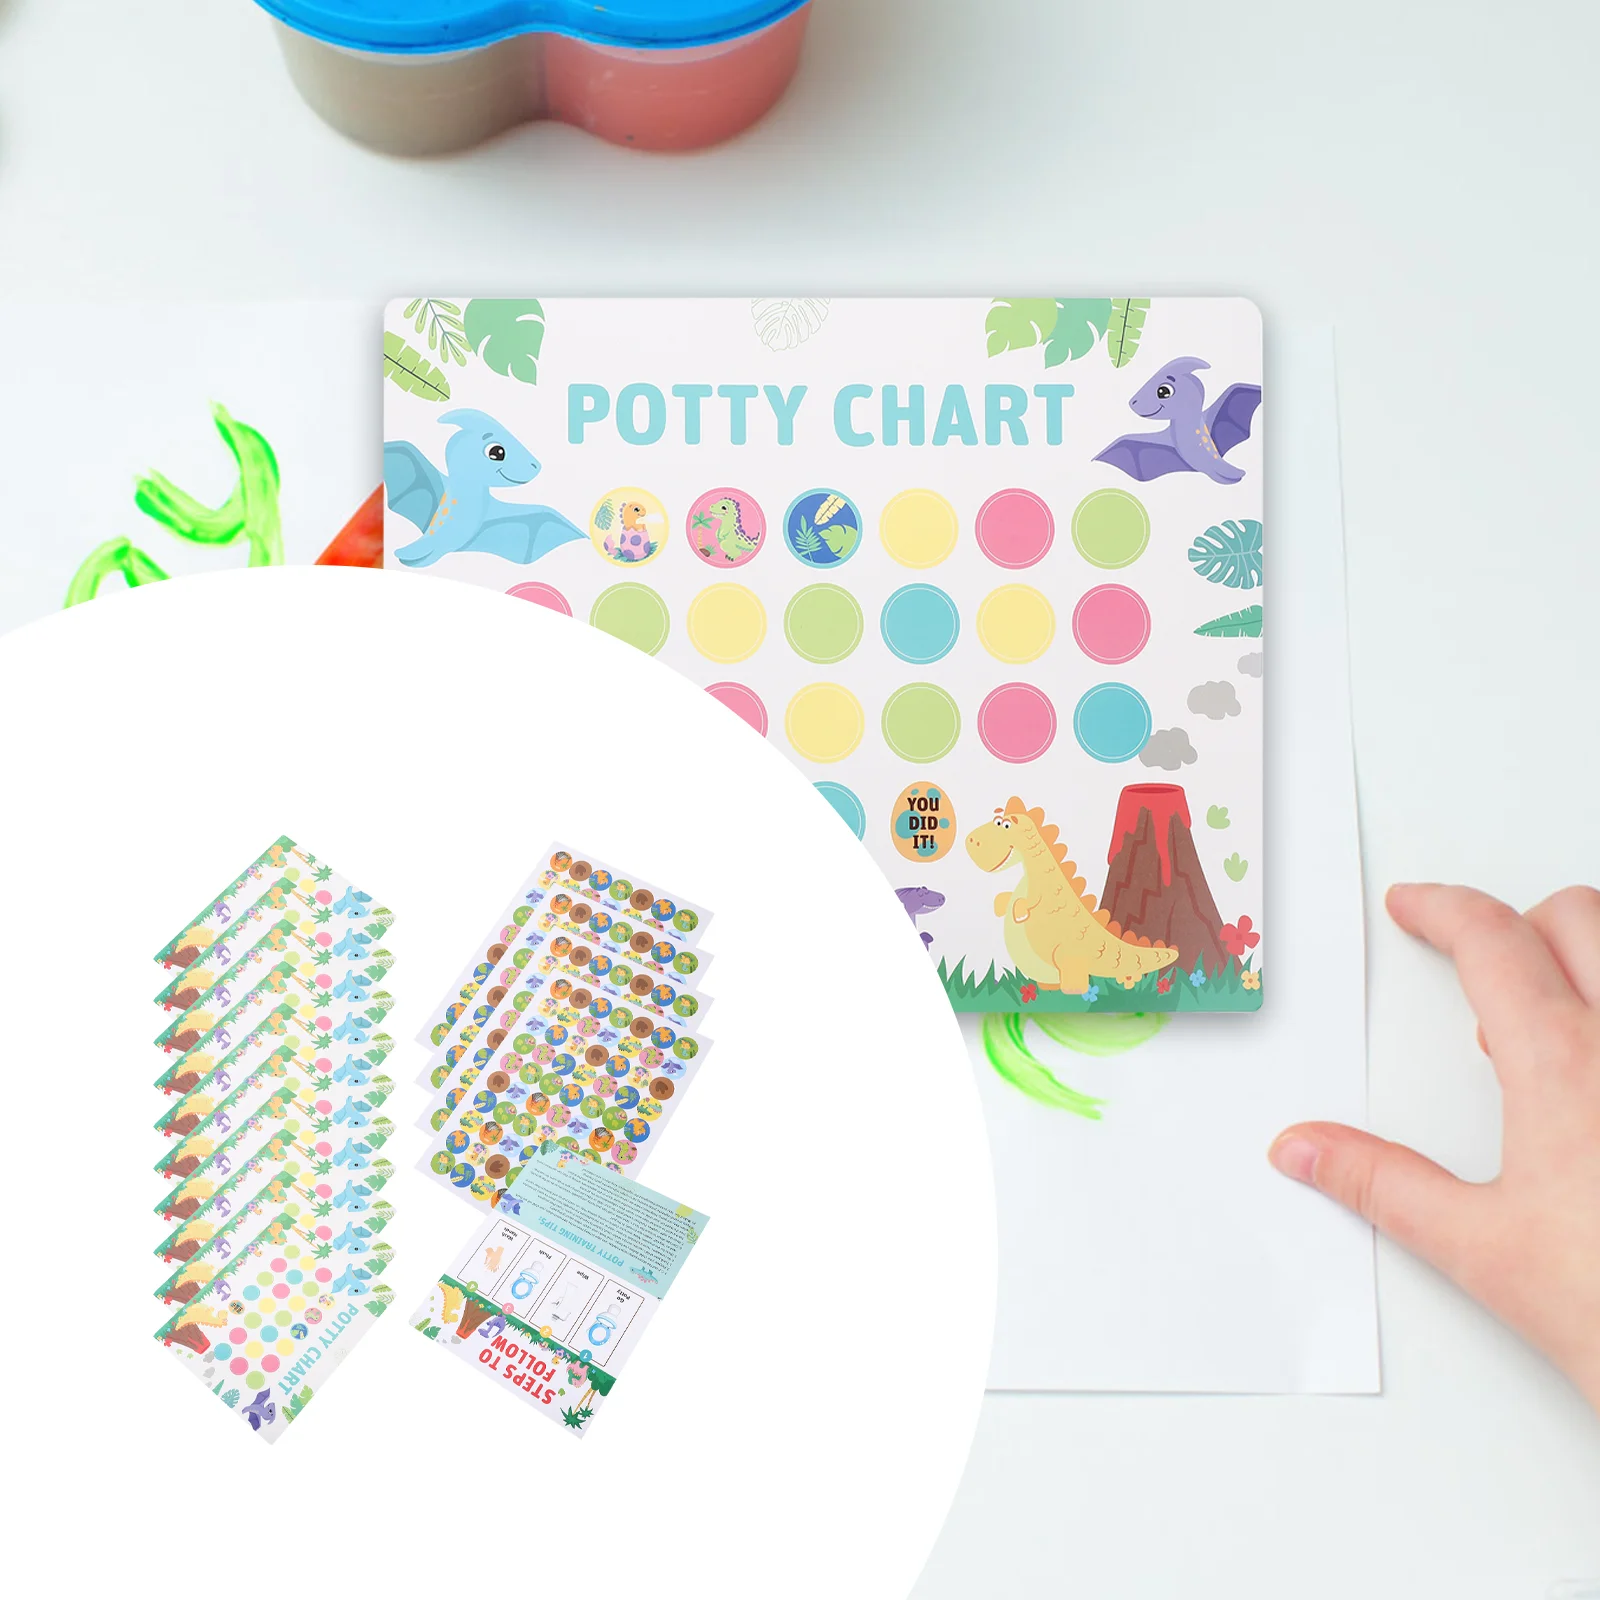 

Potty Training Chart and Sticker Toddlers Potty Training Sticker Toddler Sticker Chart for Toddler Kids Home Training